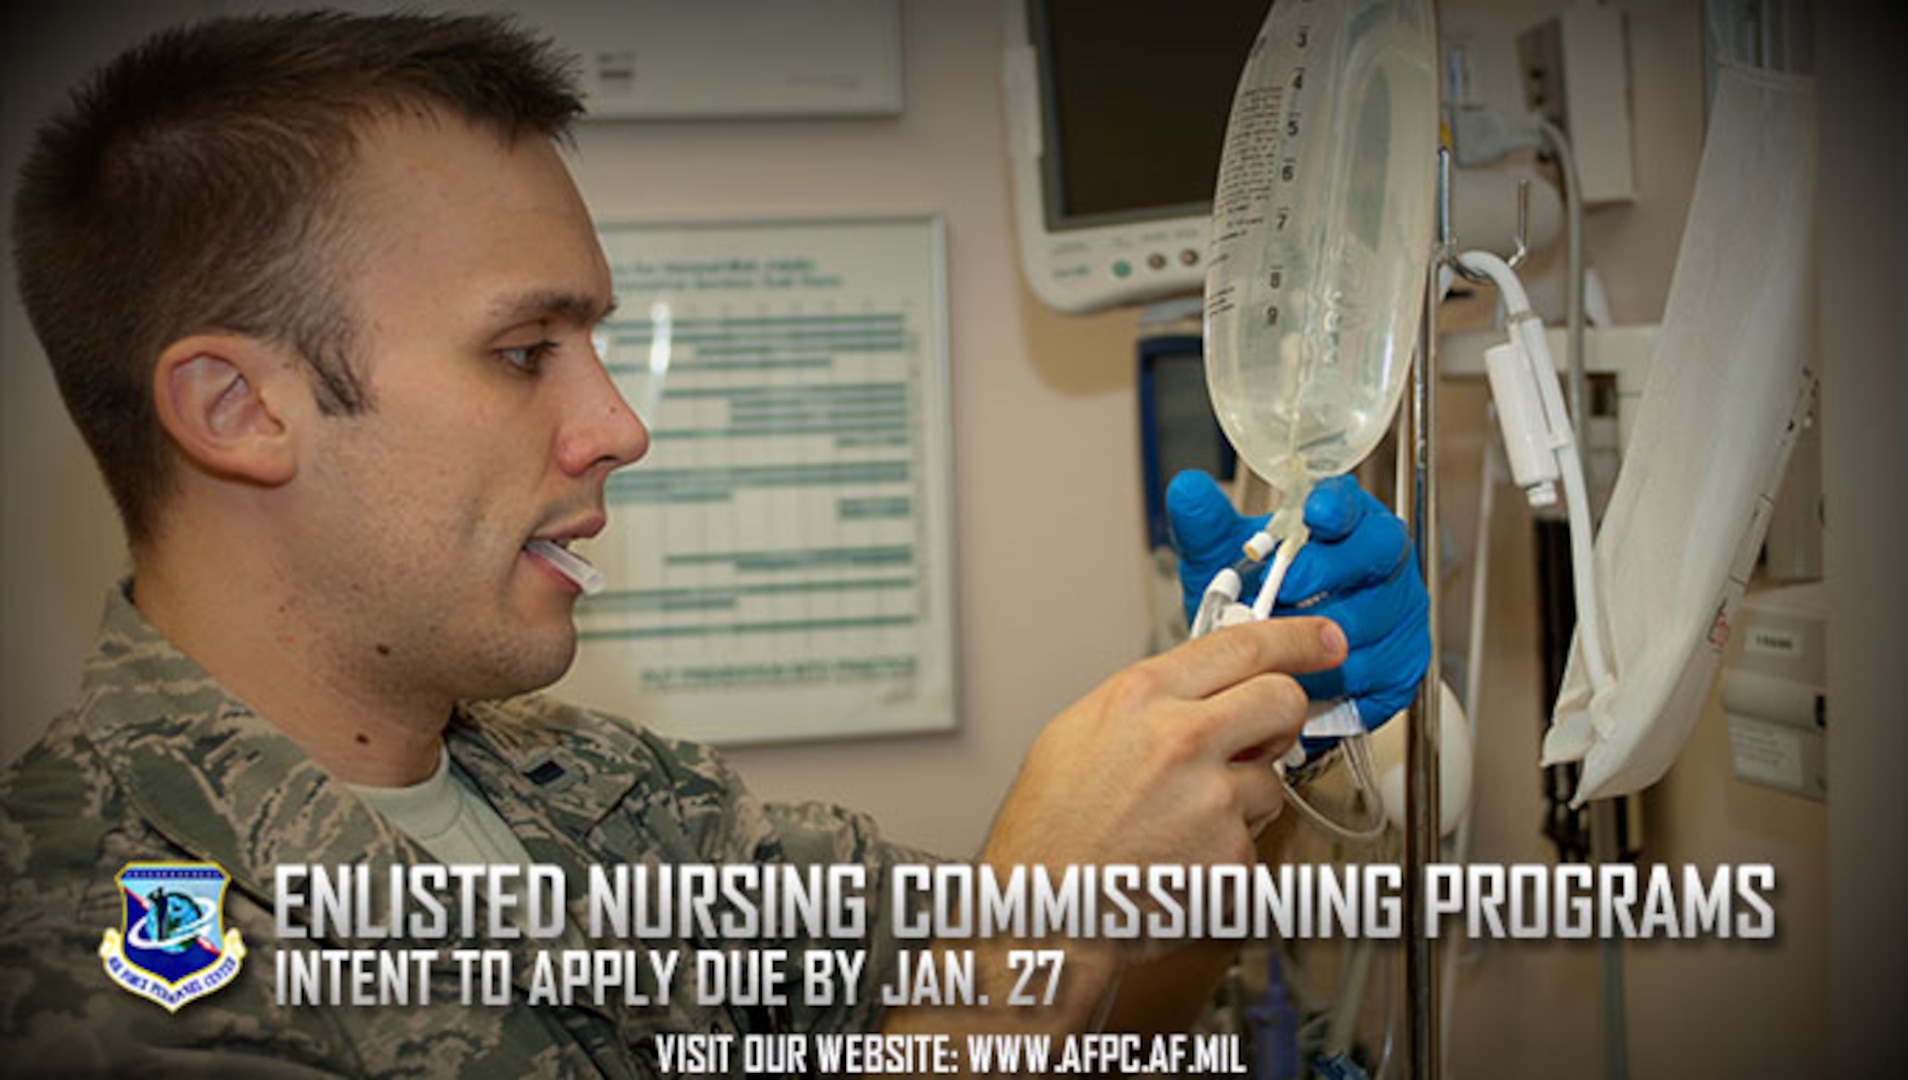 The Air Force has two commissioning programs for enlisted Airmen who have, or are close to having their nursing degrees. The Nurse Enlisted Commissioning Programs helps you finish your degree while the Direct Enlisted Commissioning Program is open to enlisted Airmen with a nursing degree and license. Initial applications are due to the Air Force Personnel Center by Jan. 27, 2017. (U.S. Air Force photo by Airman 1st Class R. Alex Durbin)